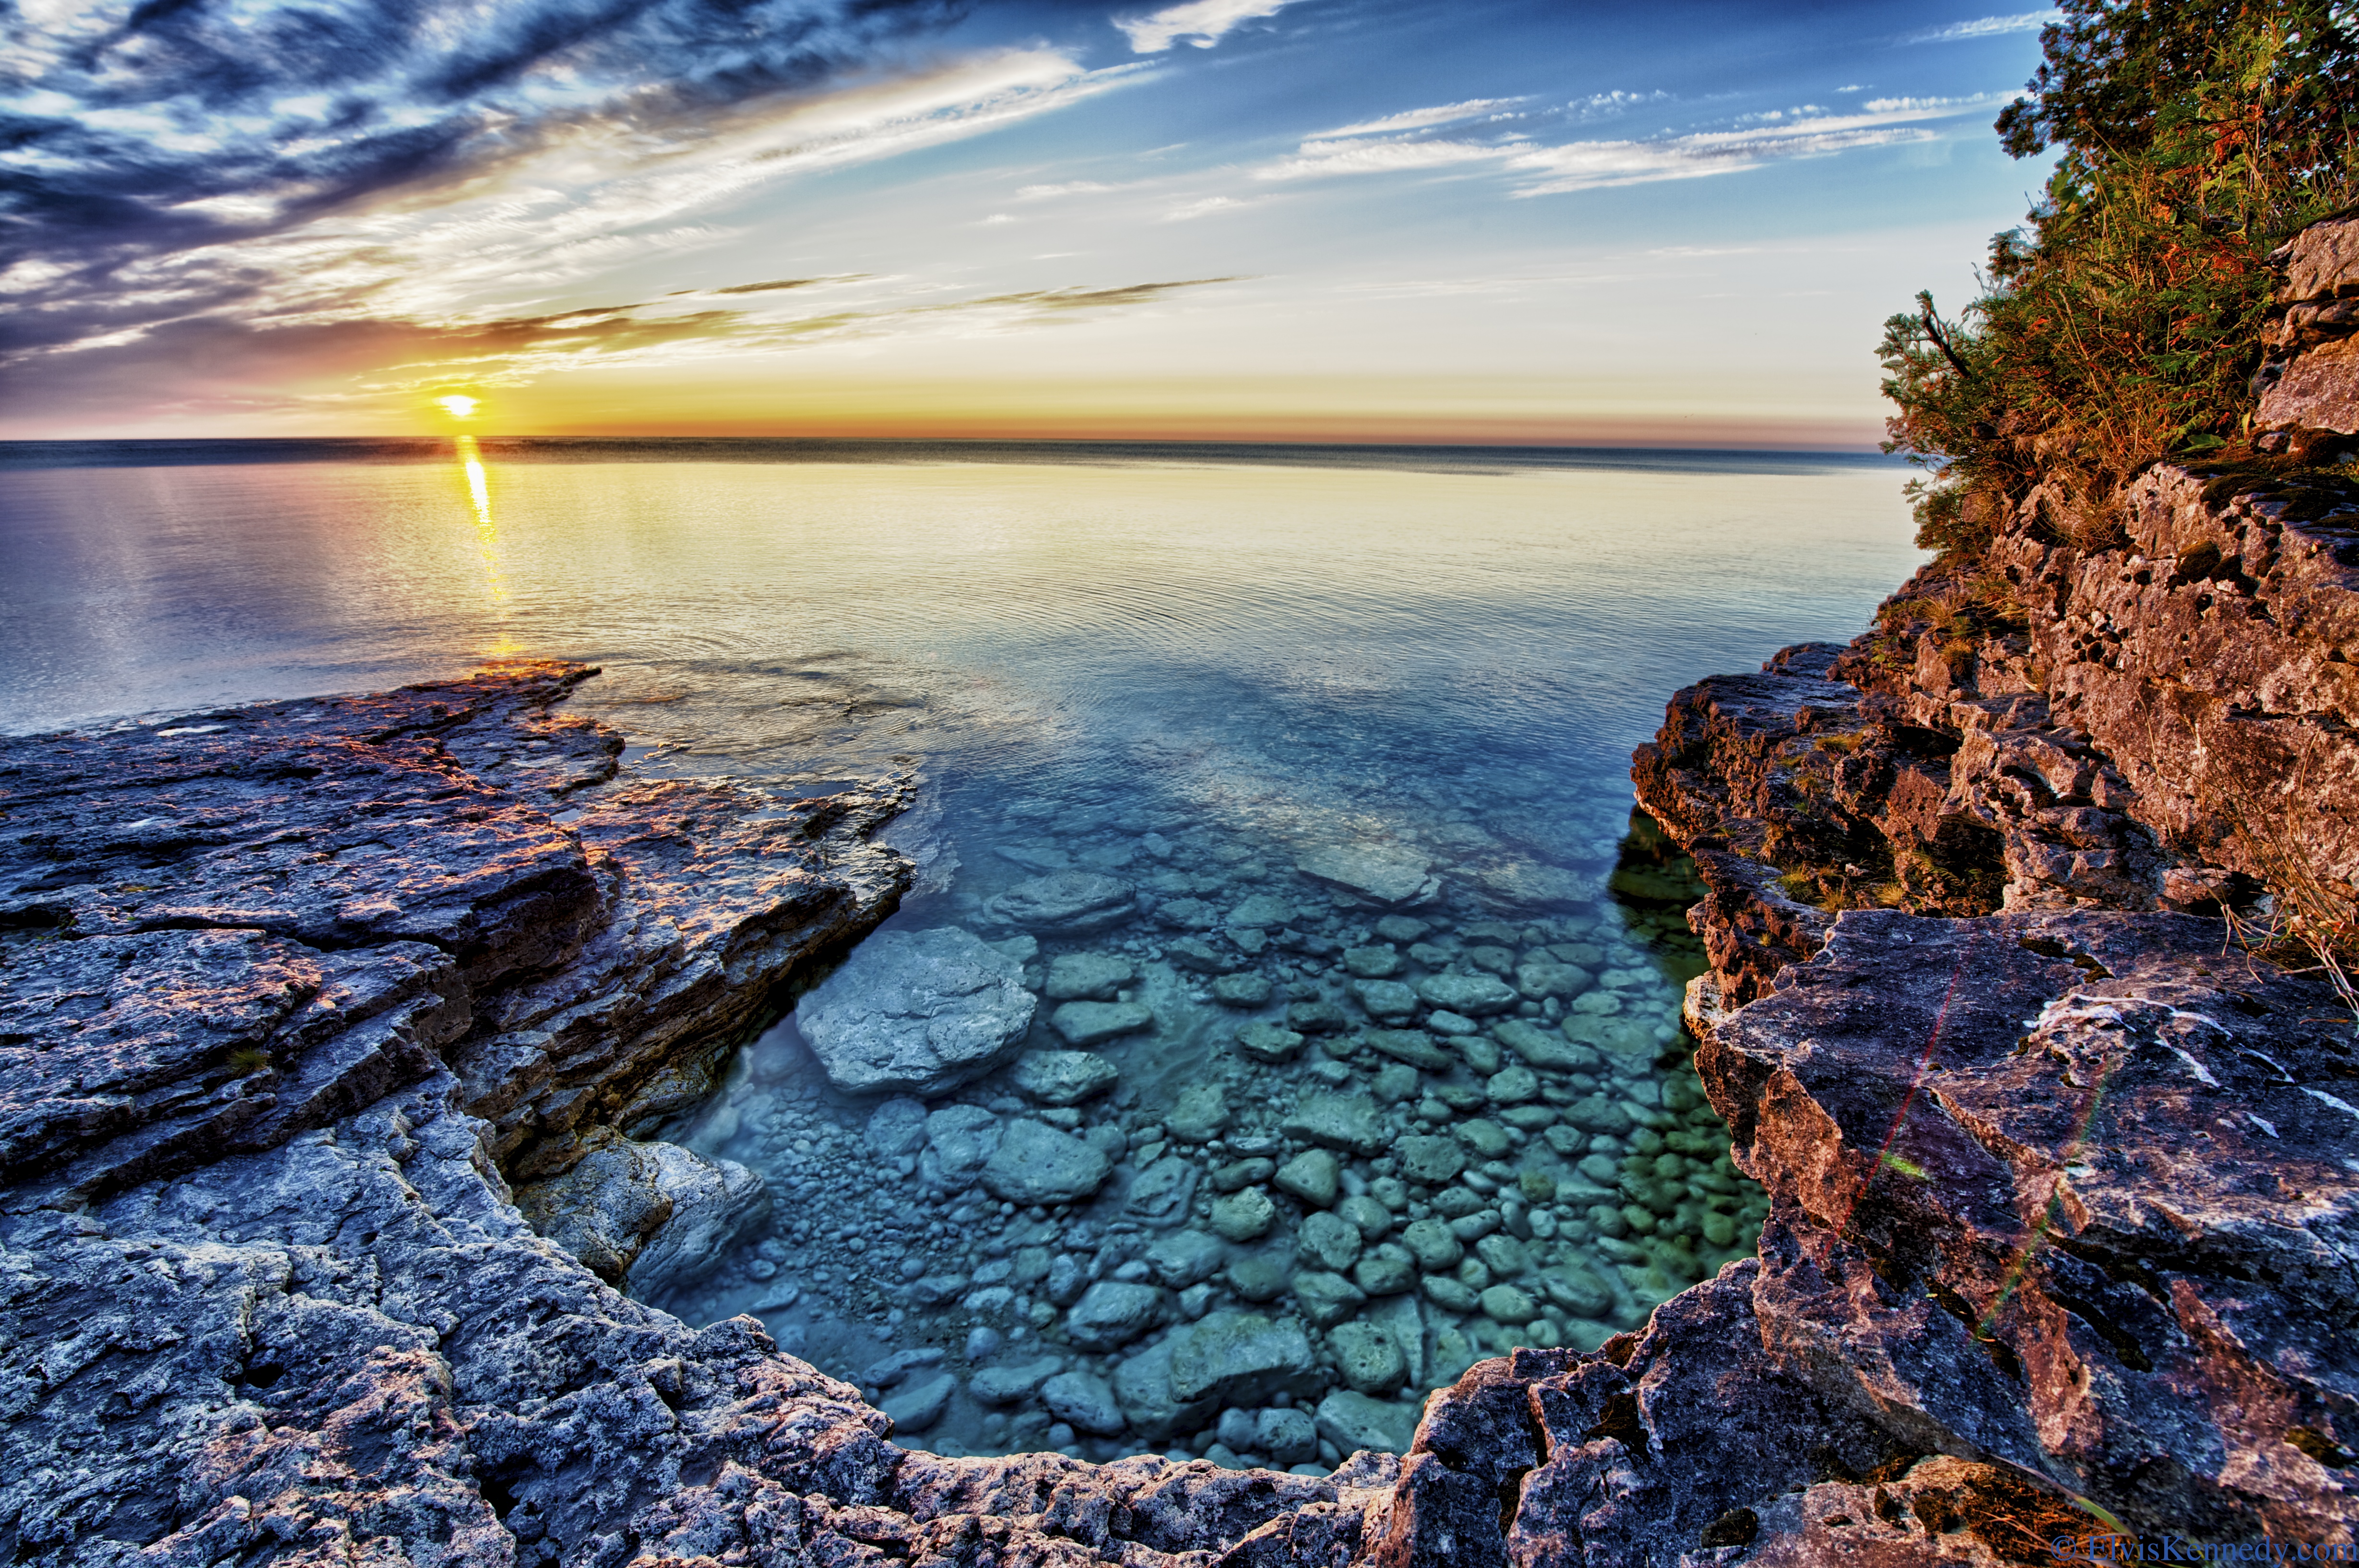 Cave Point Park In Wisconsin is So Pretty You Have to See it to Believe It